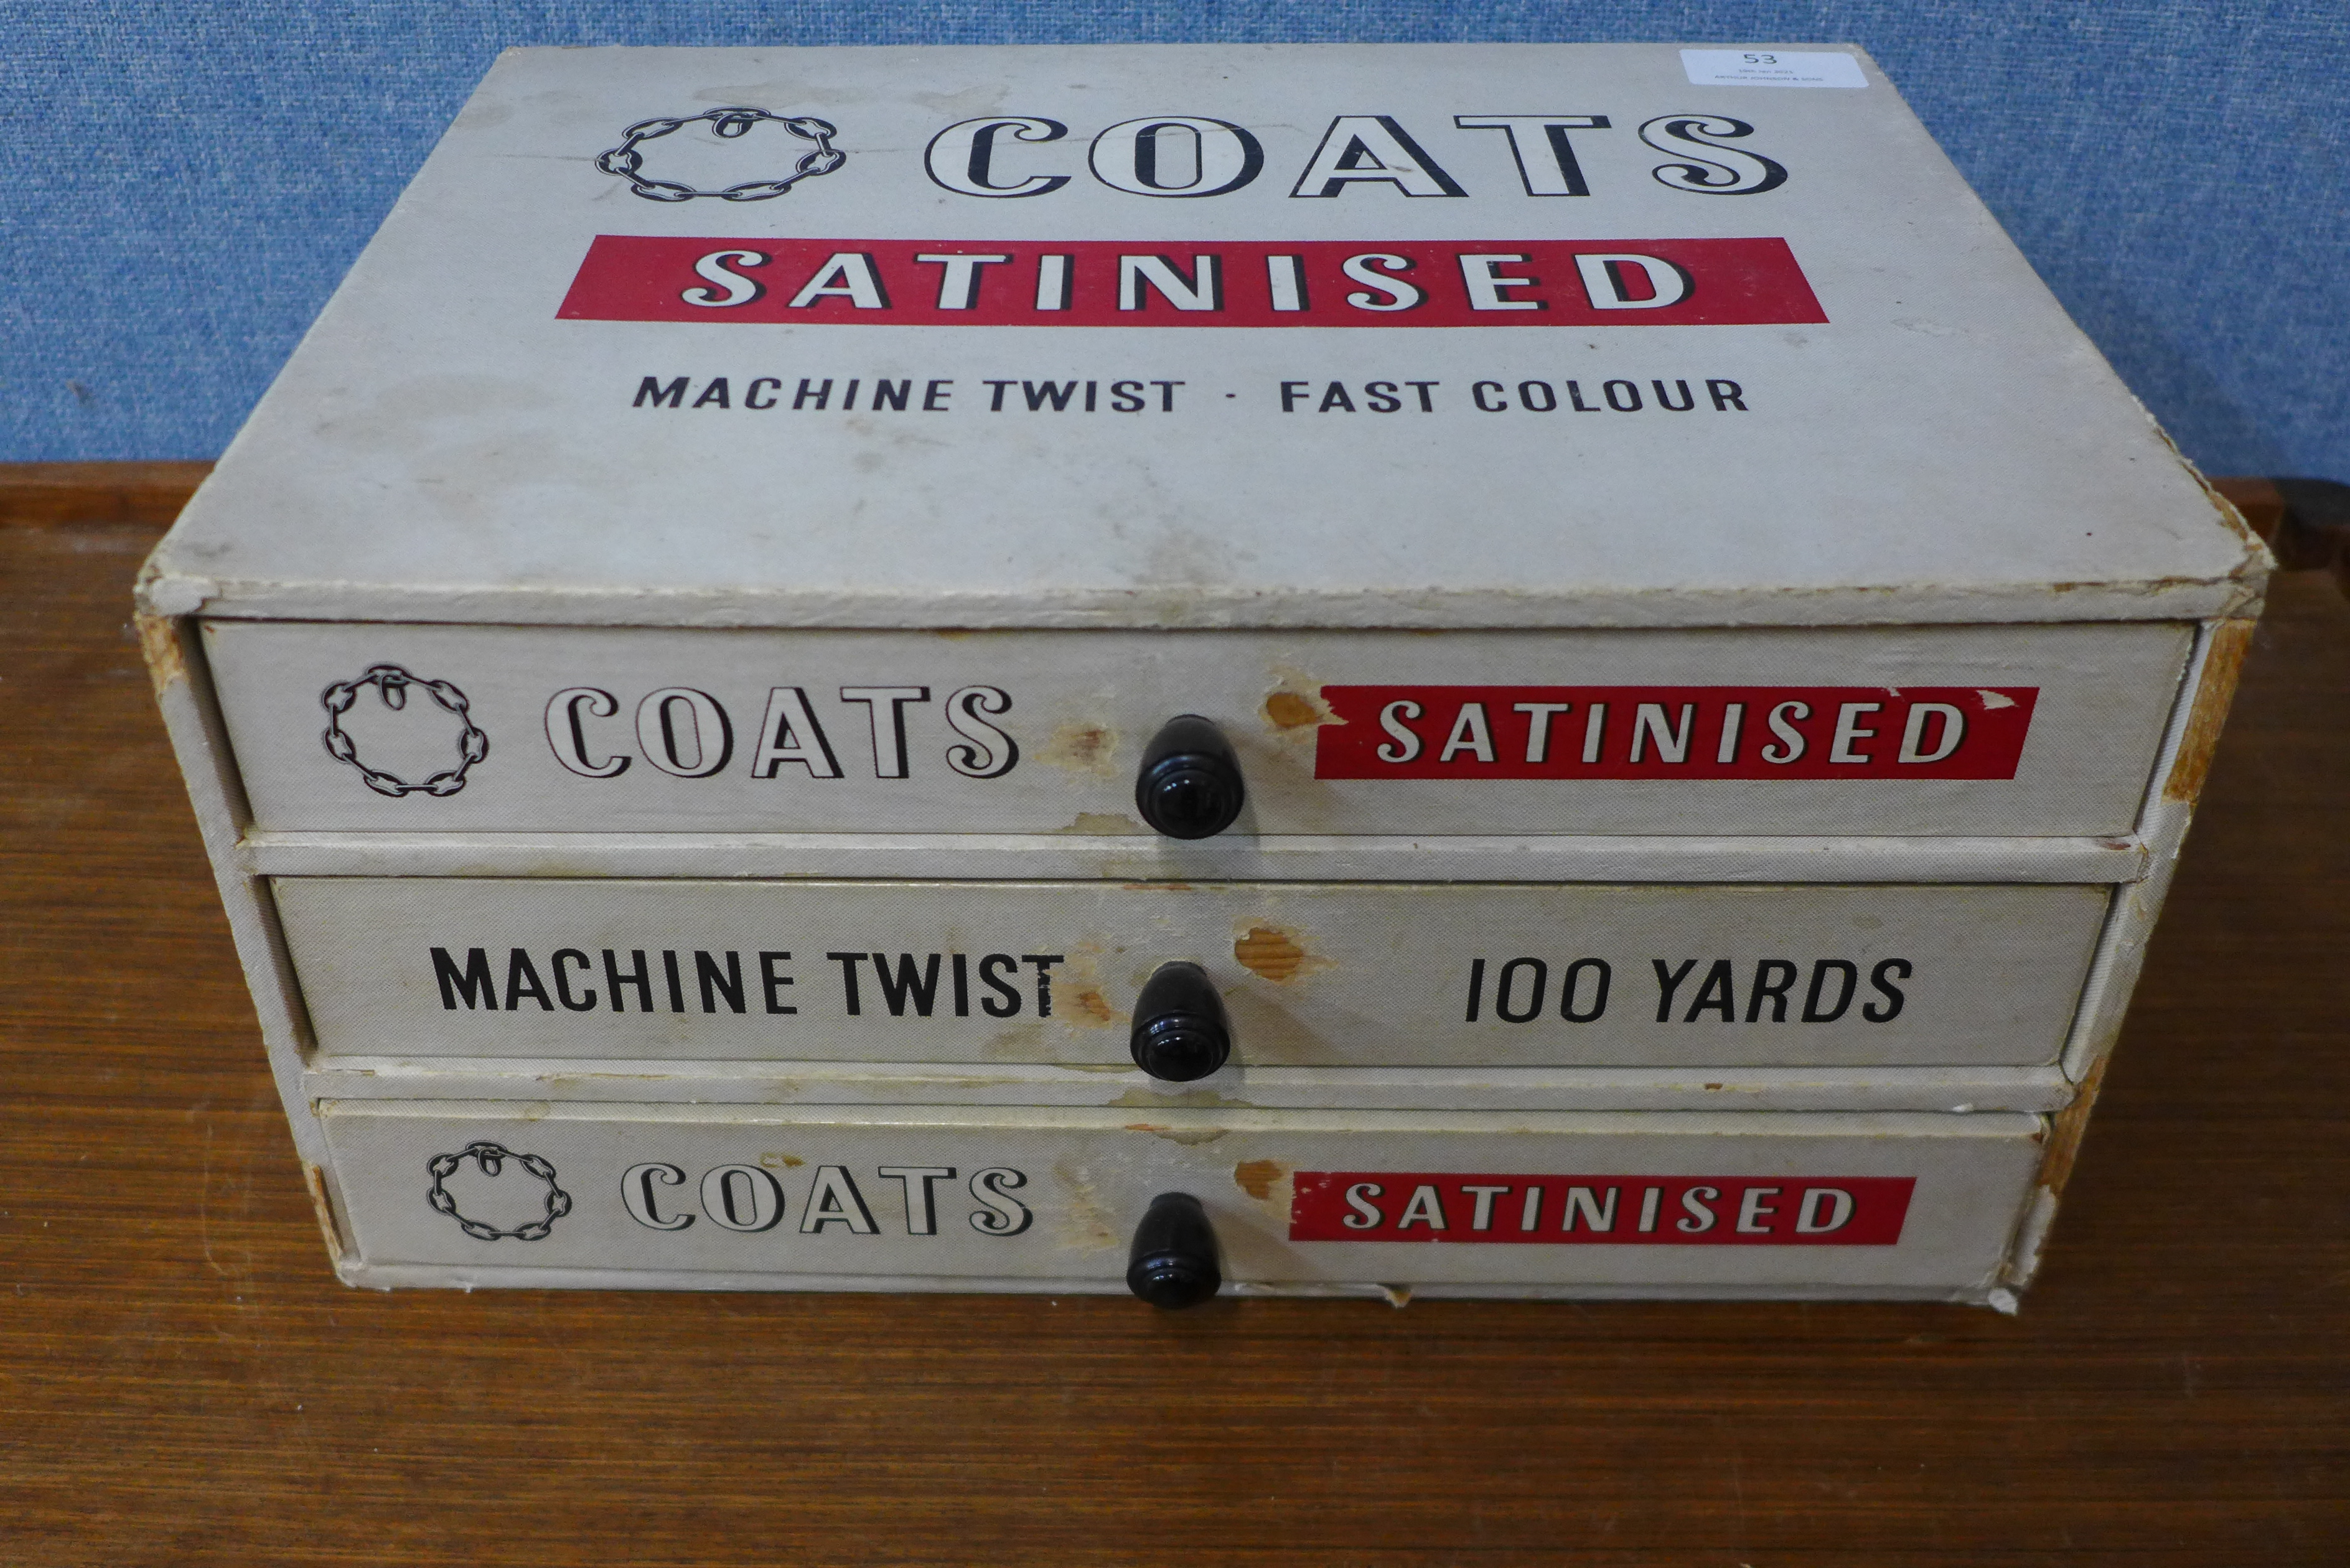 A Coats Satinised haberdashery shop chest, 15cms h x 31cms w